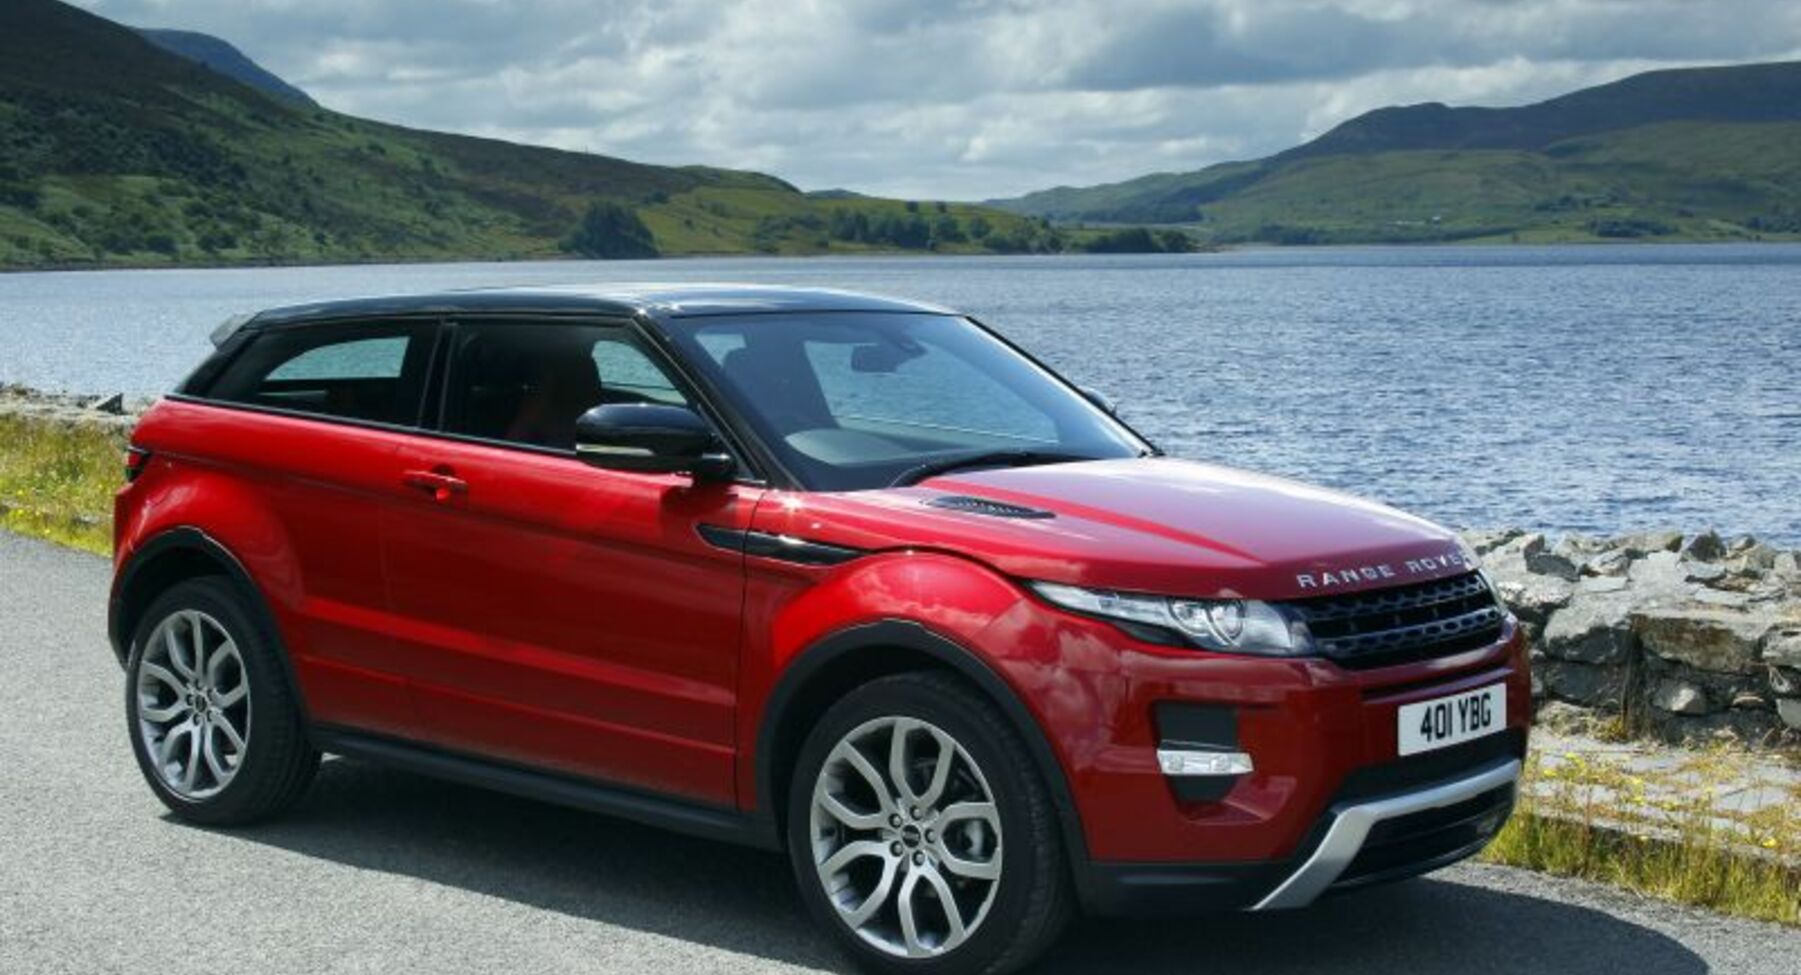 Land Rover Range Rover Evoque I coupe 2.2 TD4 (150 Hp) 4WD Automatic 2012, 2013, 2014, 2015 